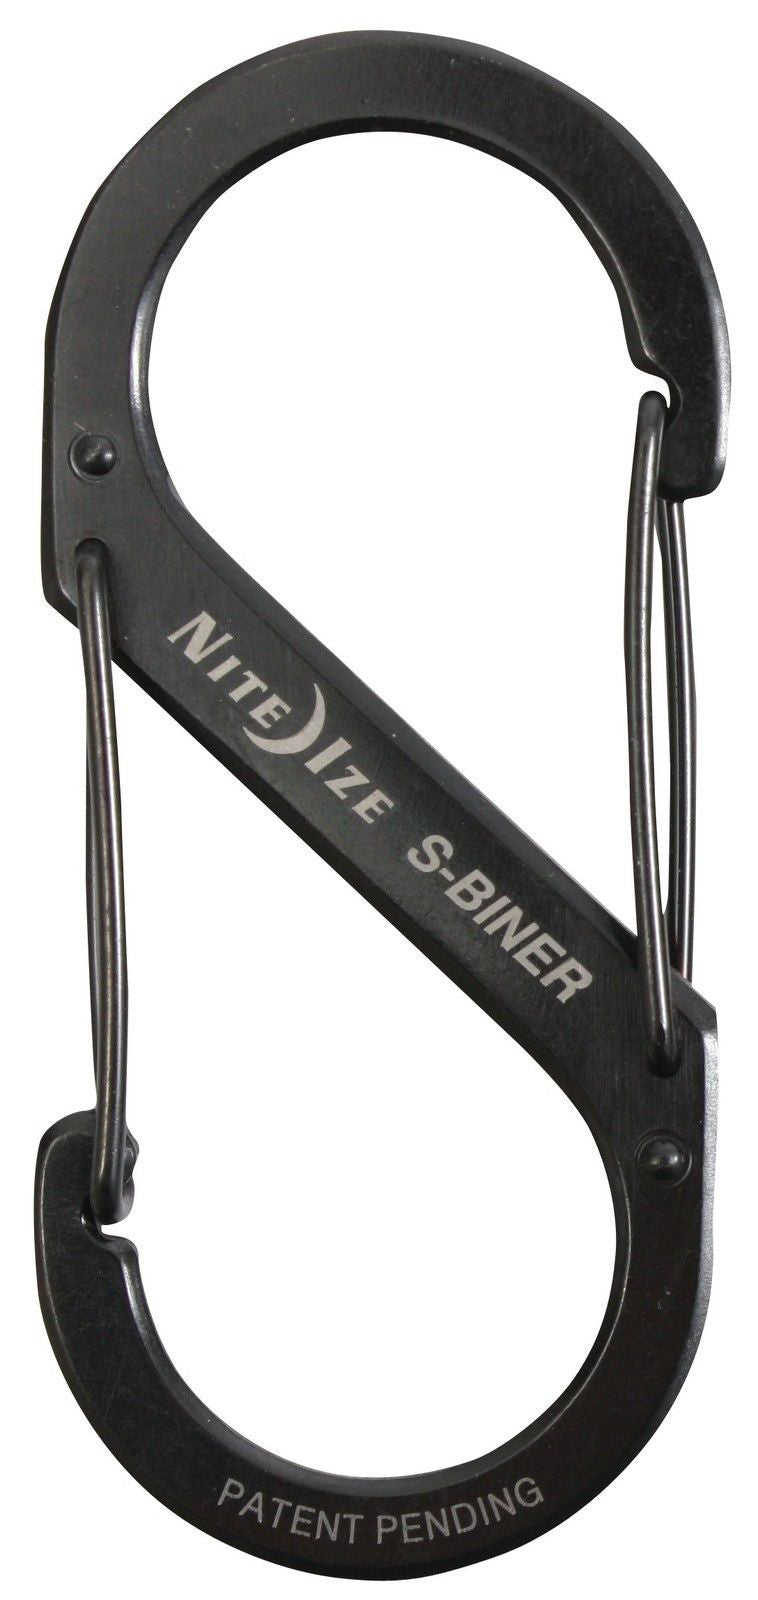 Black Nite-Ize S-Biners #3 Black Double Gated Carabiner Holds Up To 25 Lbs